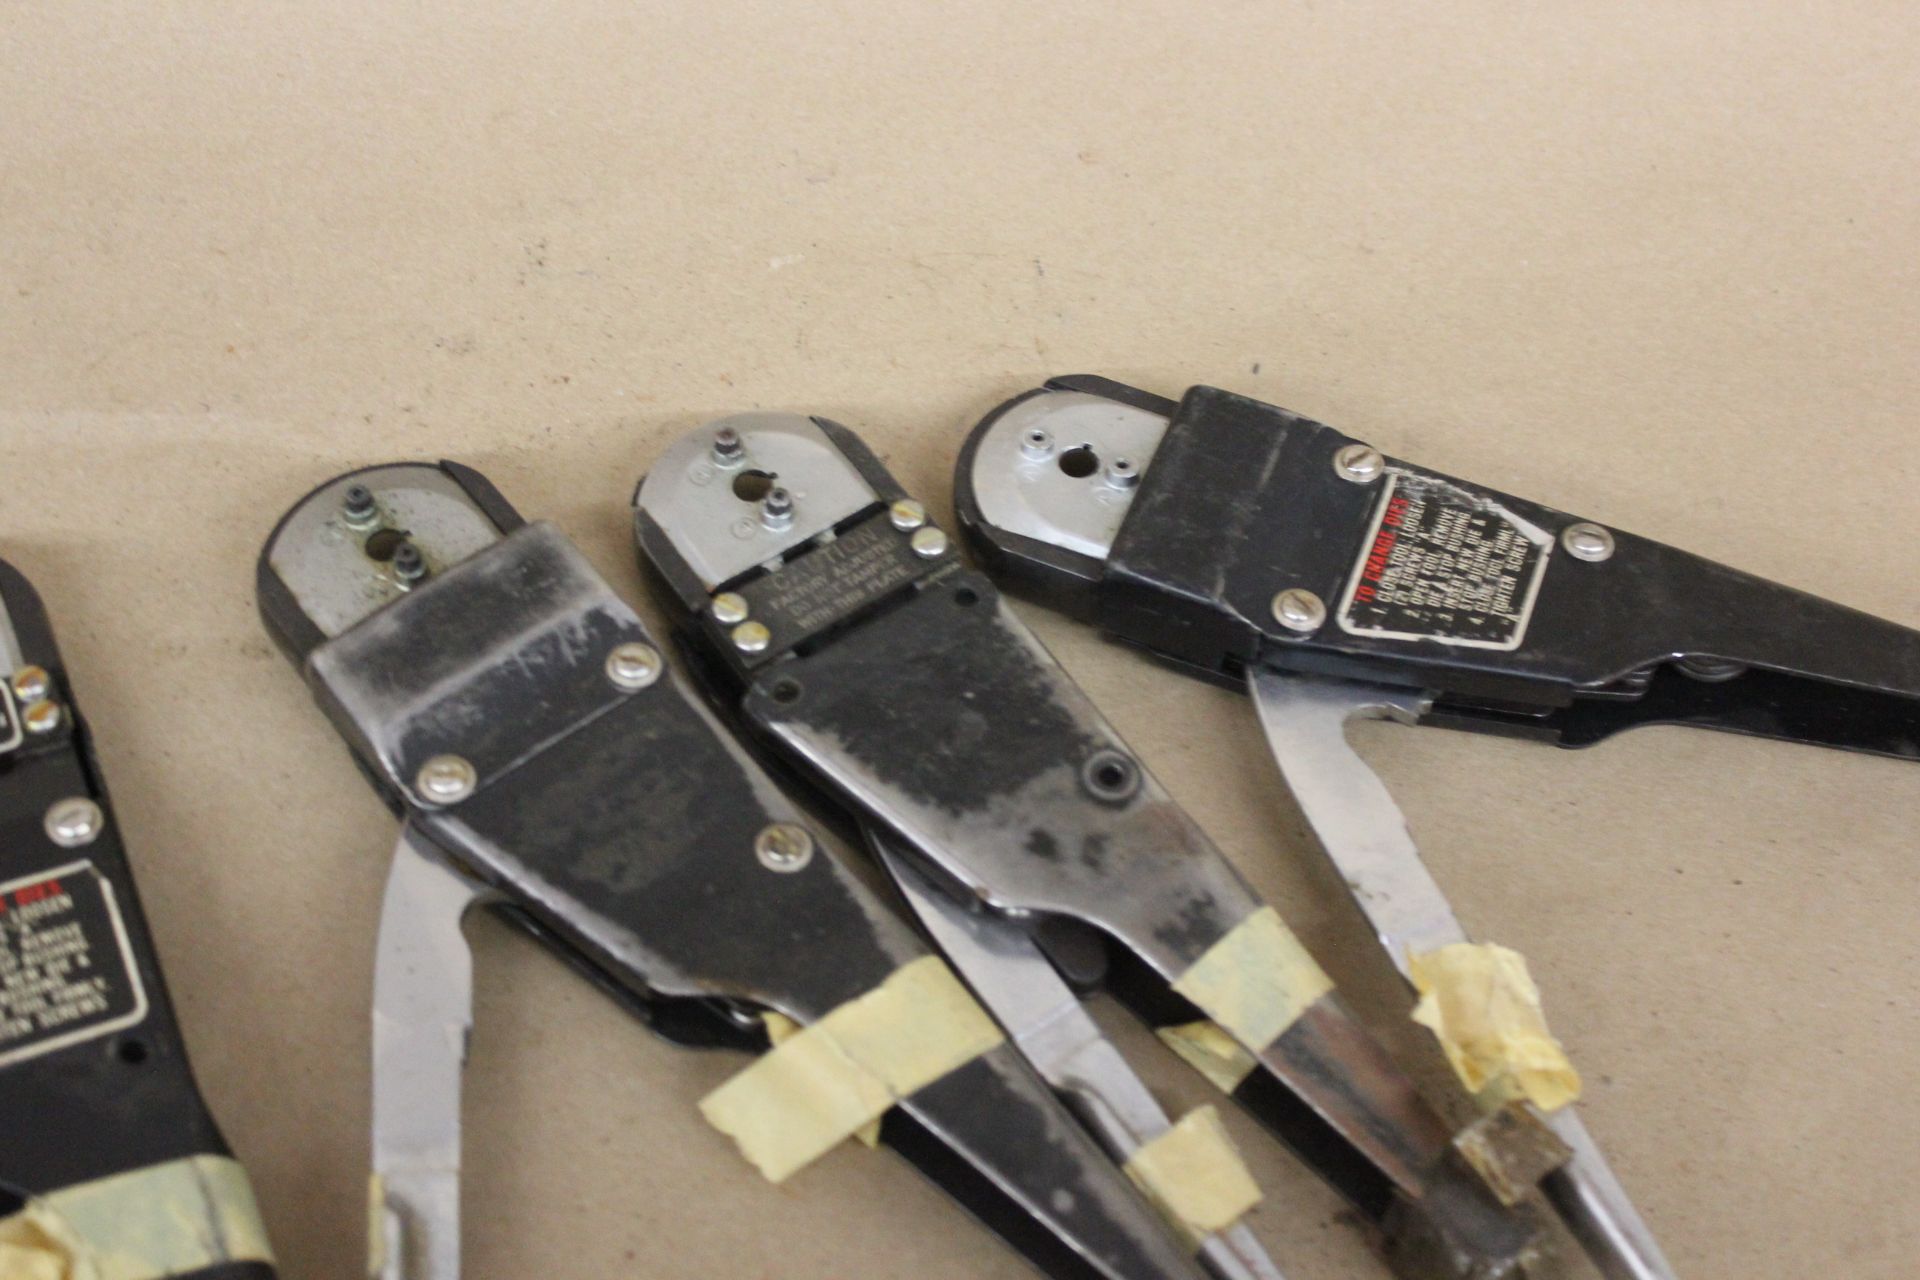 LOT OF BURNDY INDUSTRIAL CRIMPERS CRIMP TOOLS - Image 5 of 5